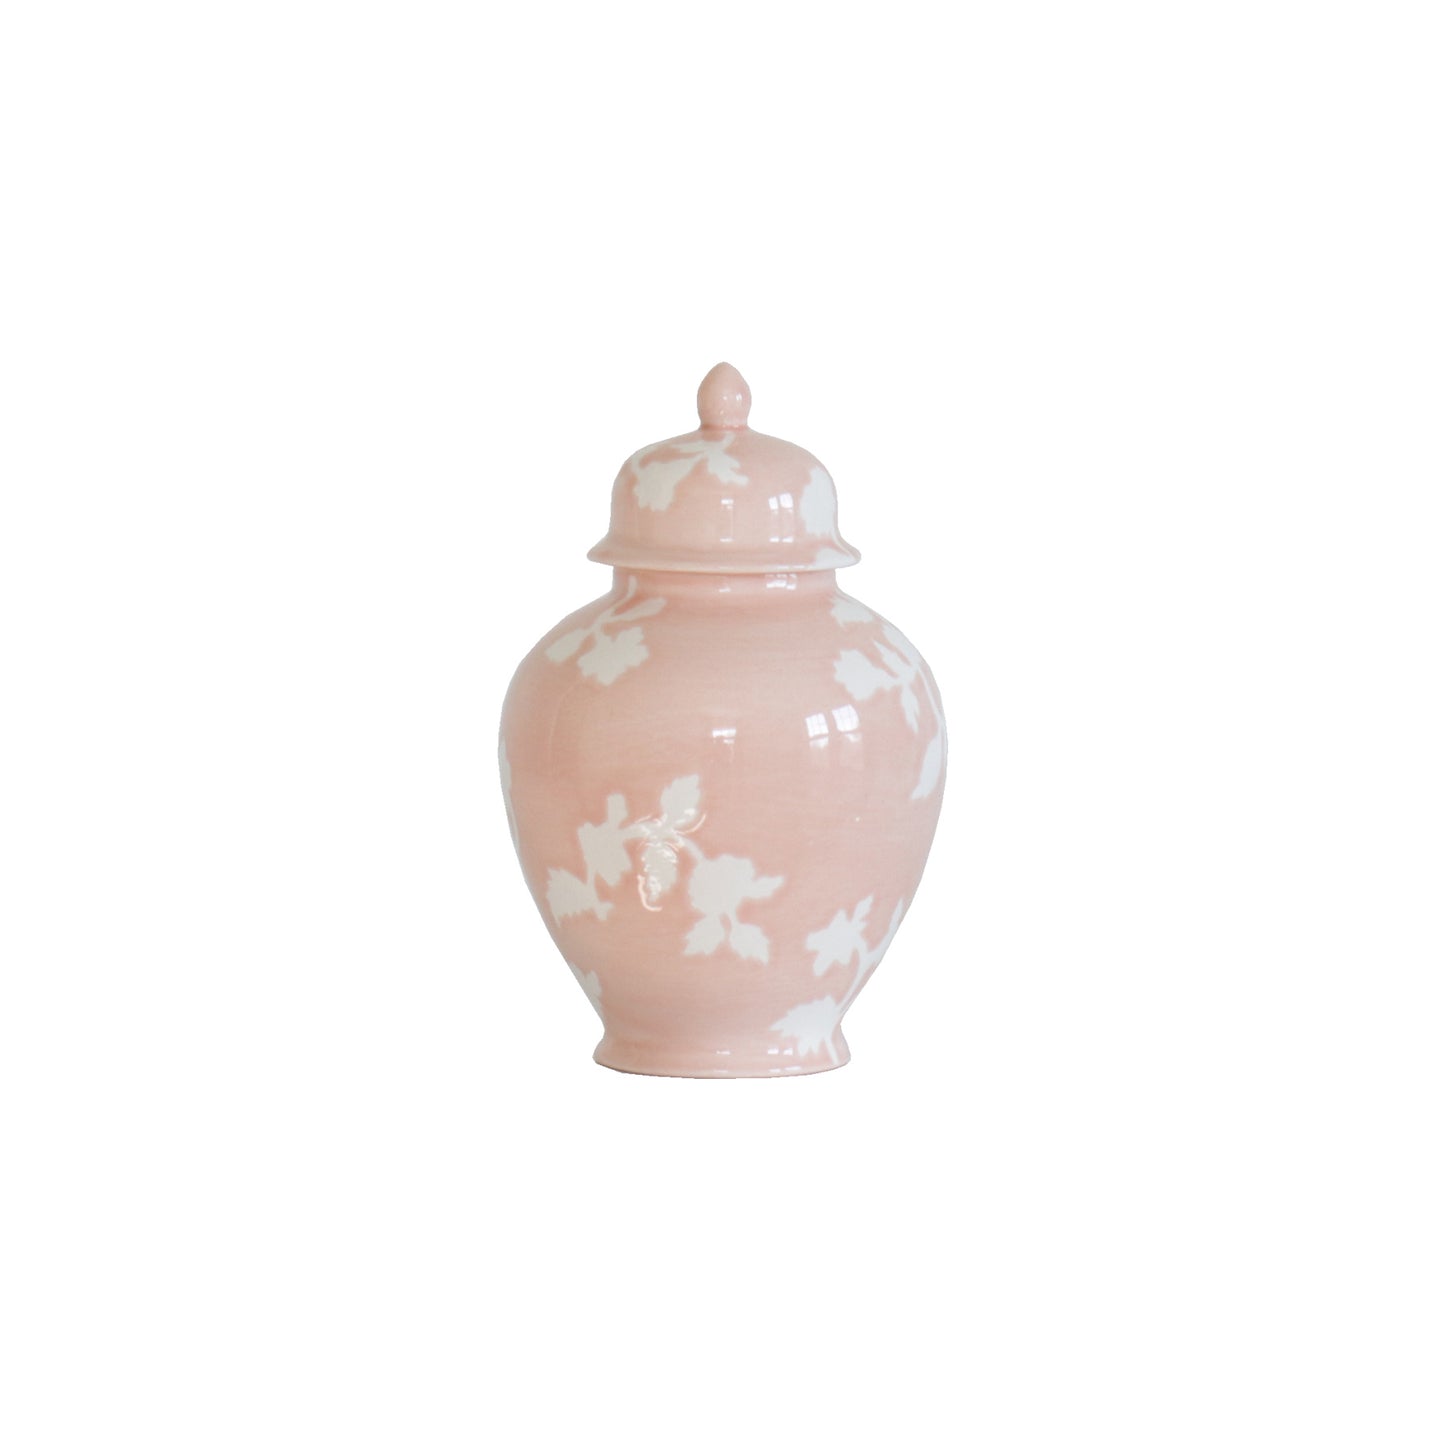 Chinoiserie Dreams Ginger Jars in Blush